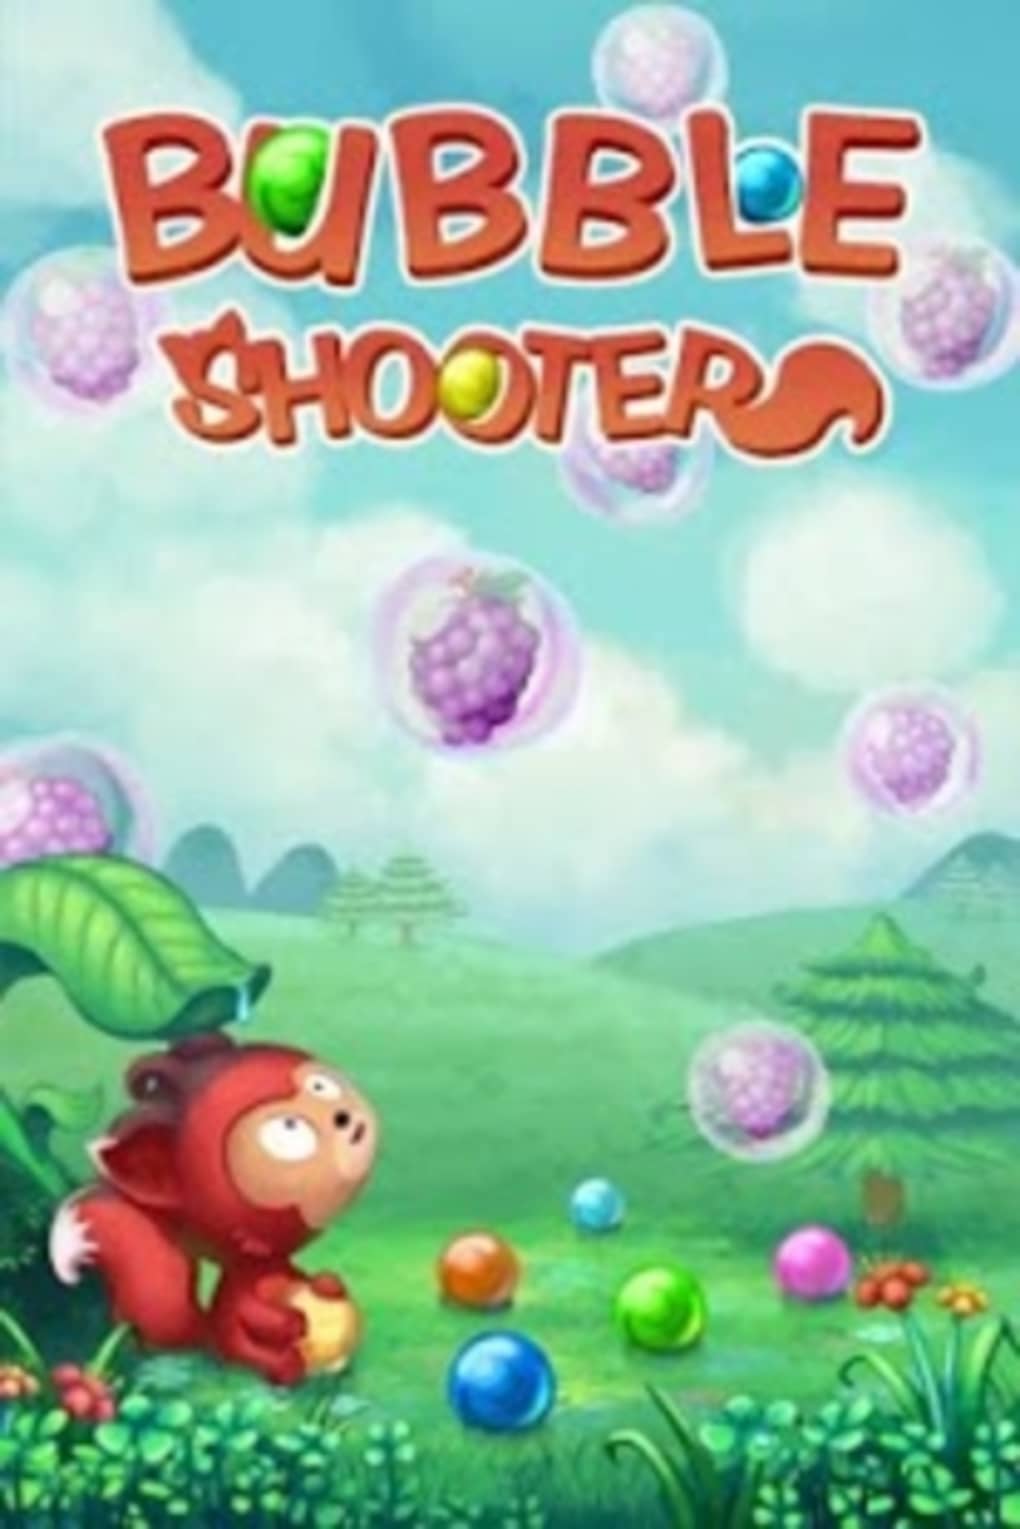 Free shooters for pc